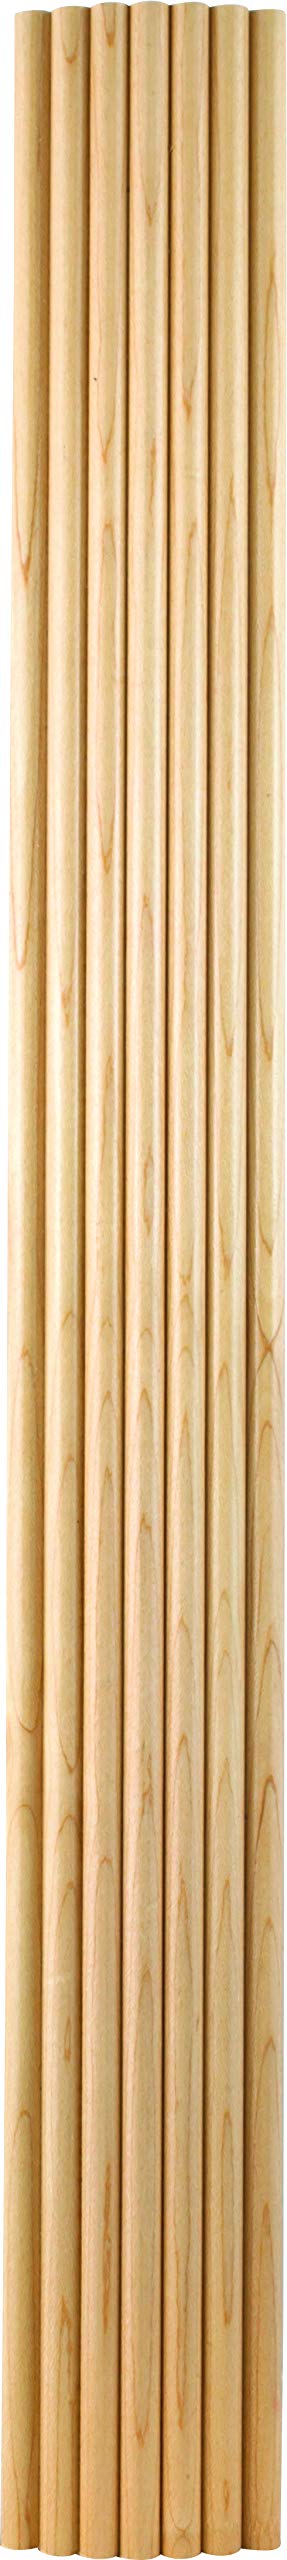 Hardware Resources CC5CH 3/4" D x 2-5/8" H Cherry Reed Corner Moulding